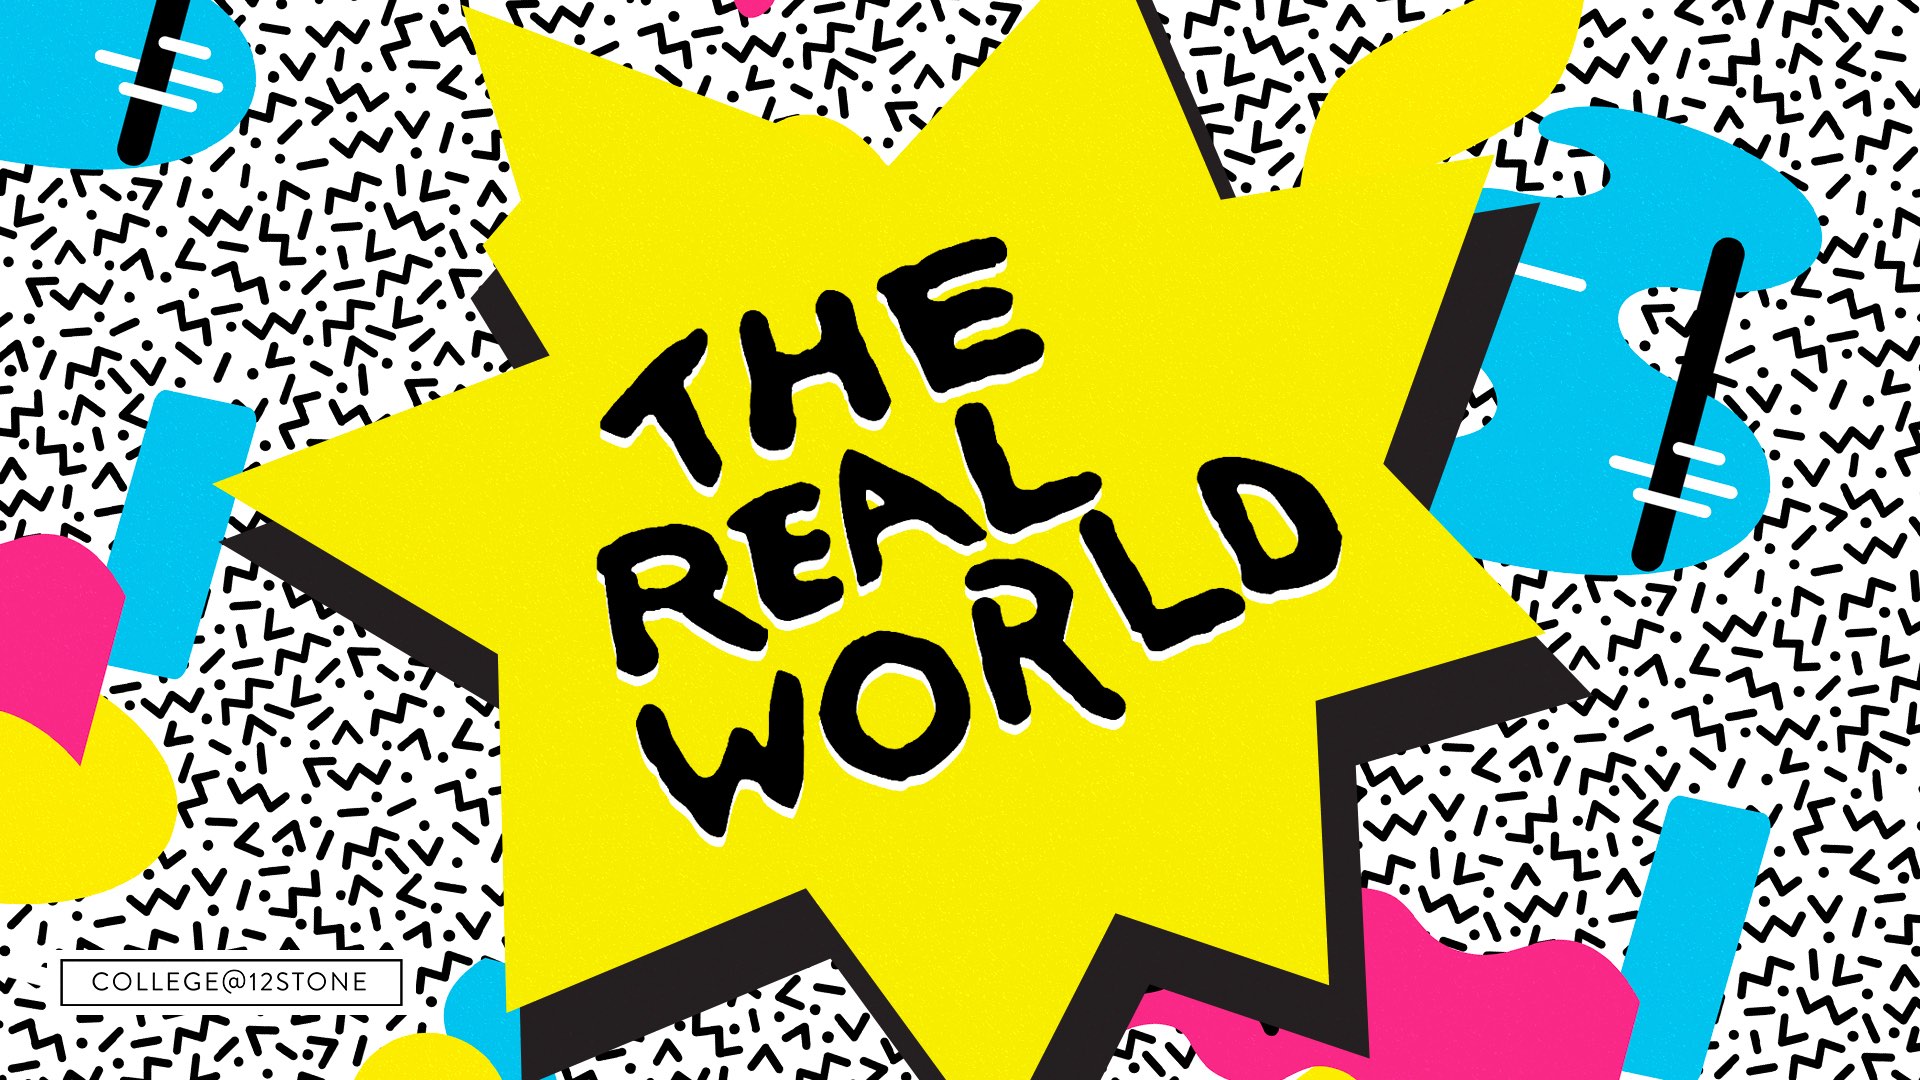 The Real World - Week 3